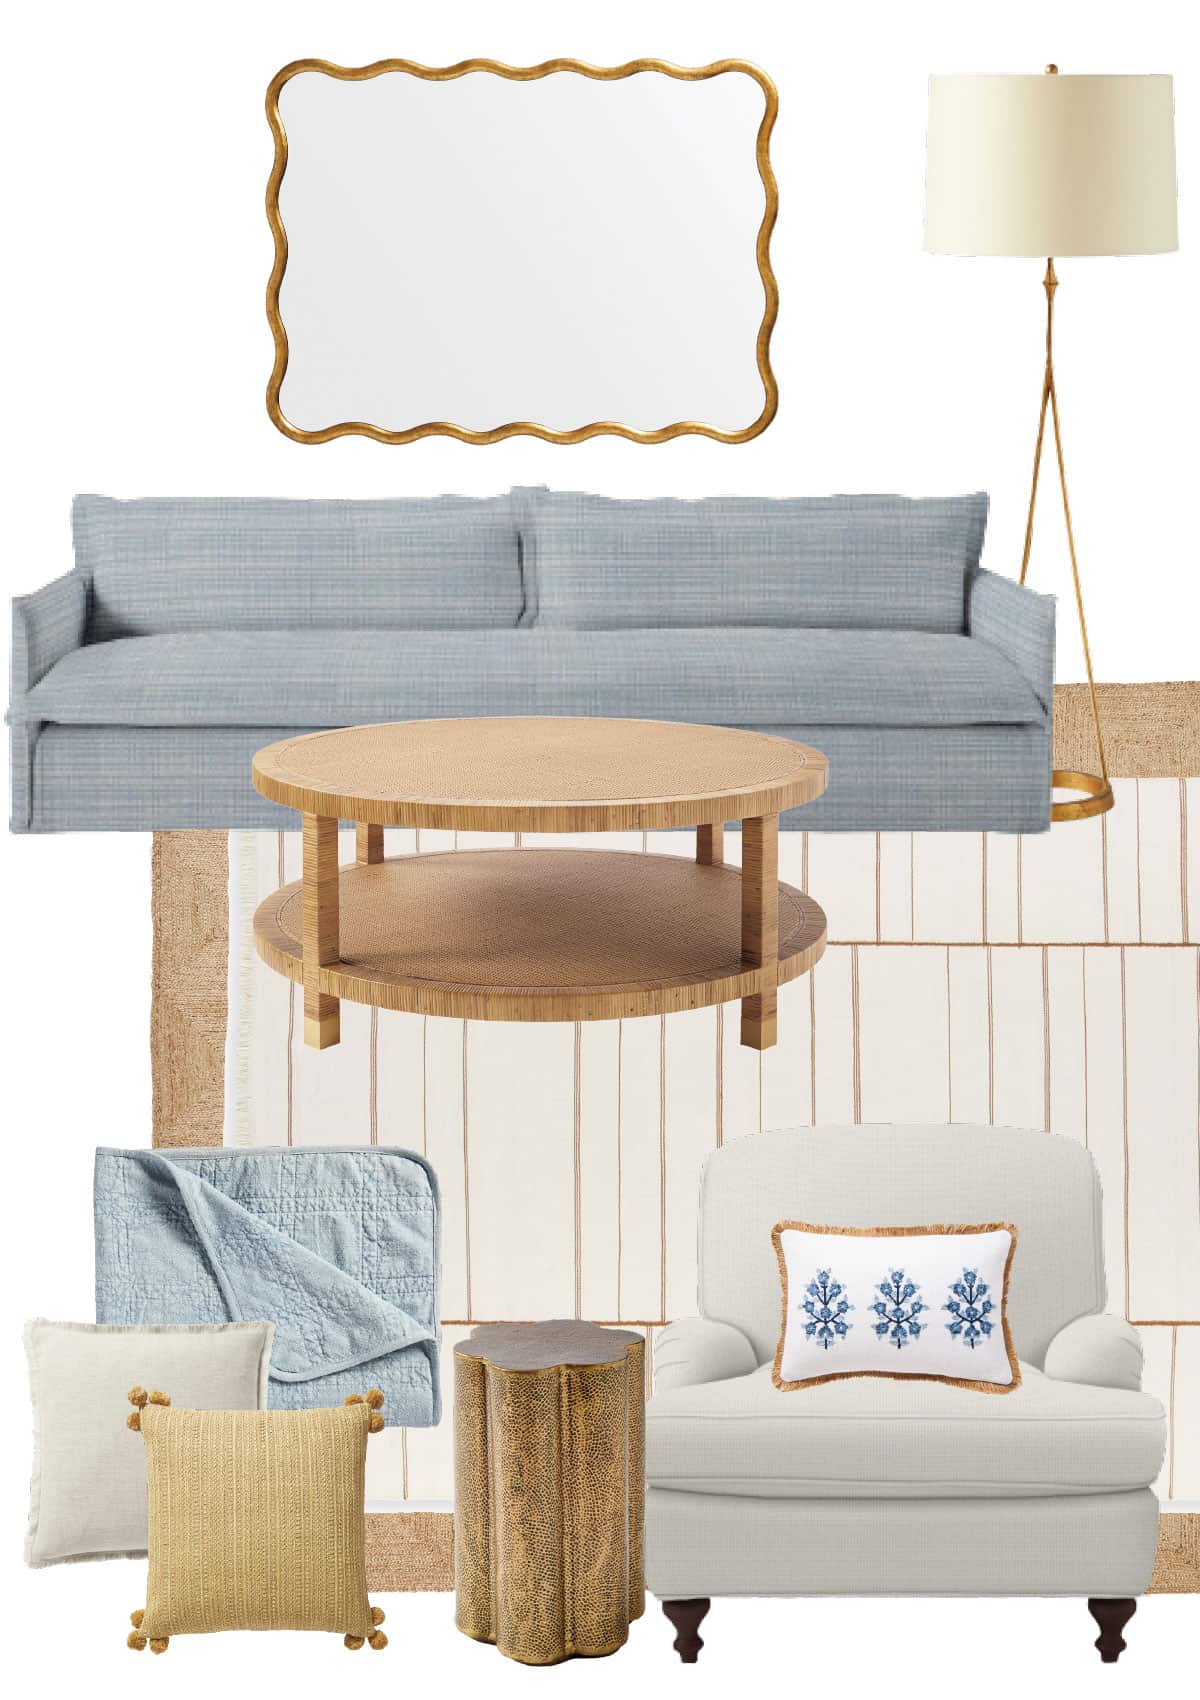 Serena and Lily Home Decor Ideas - living room mood board